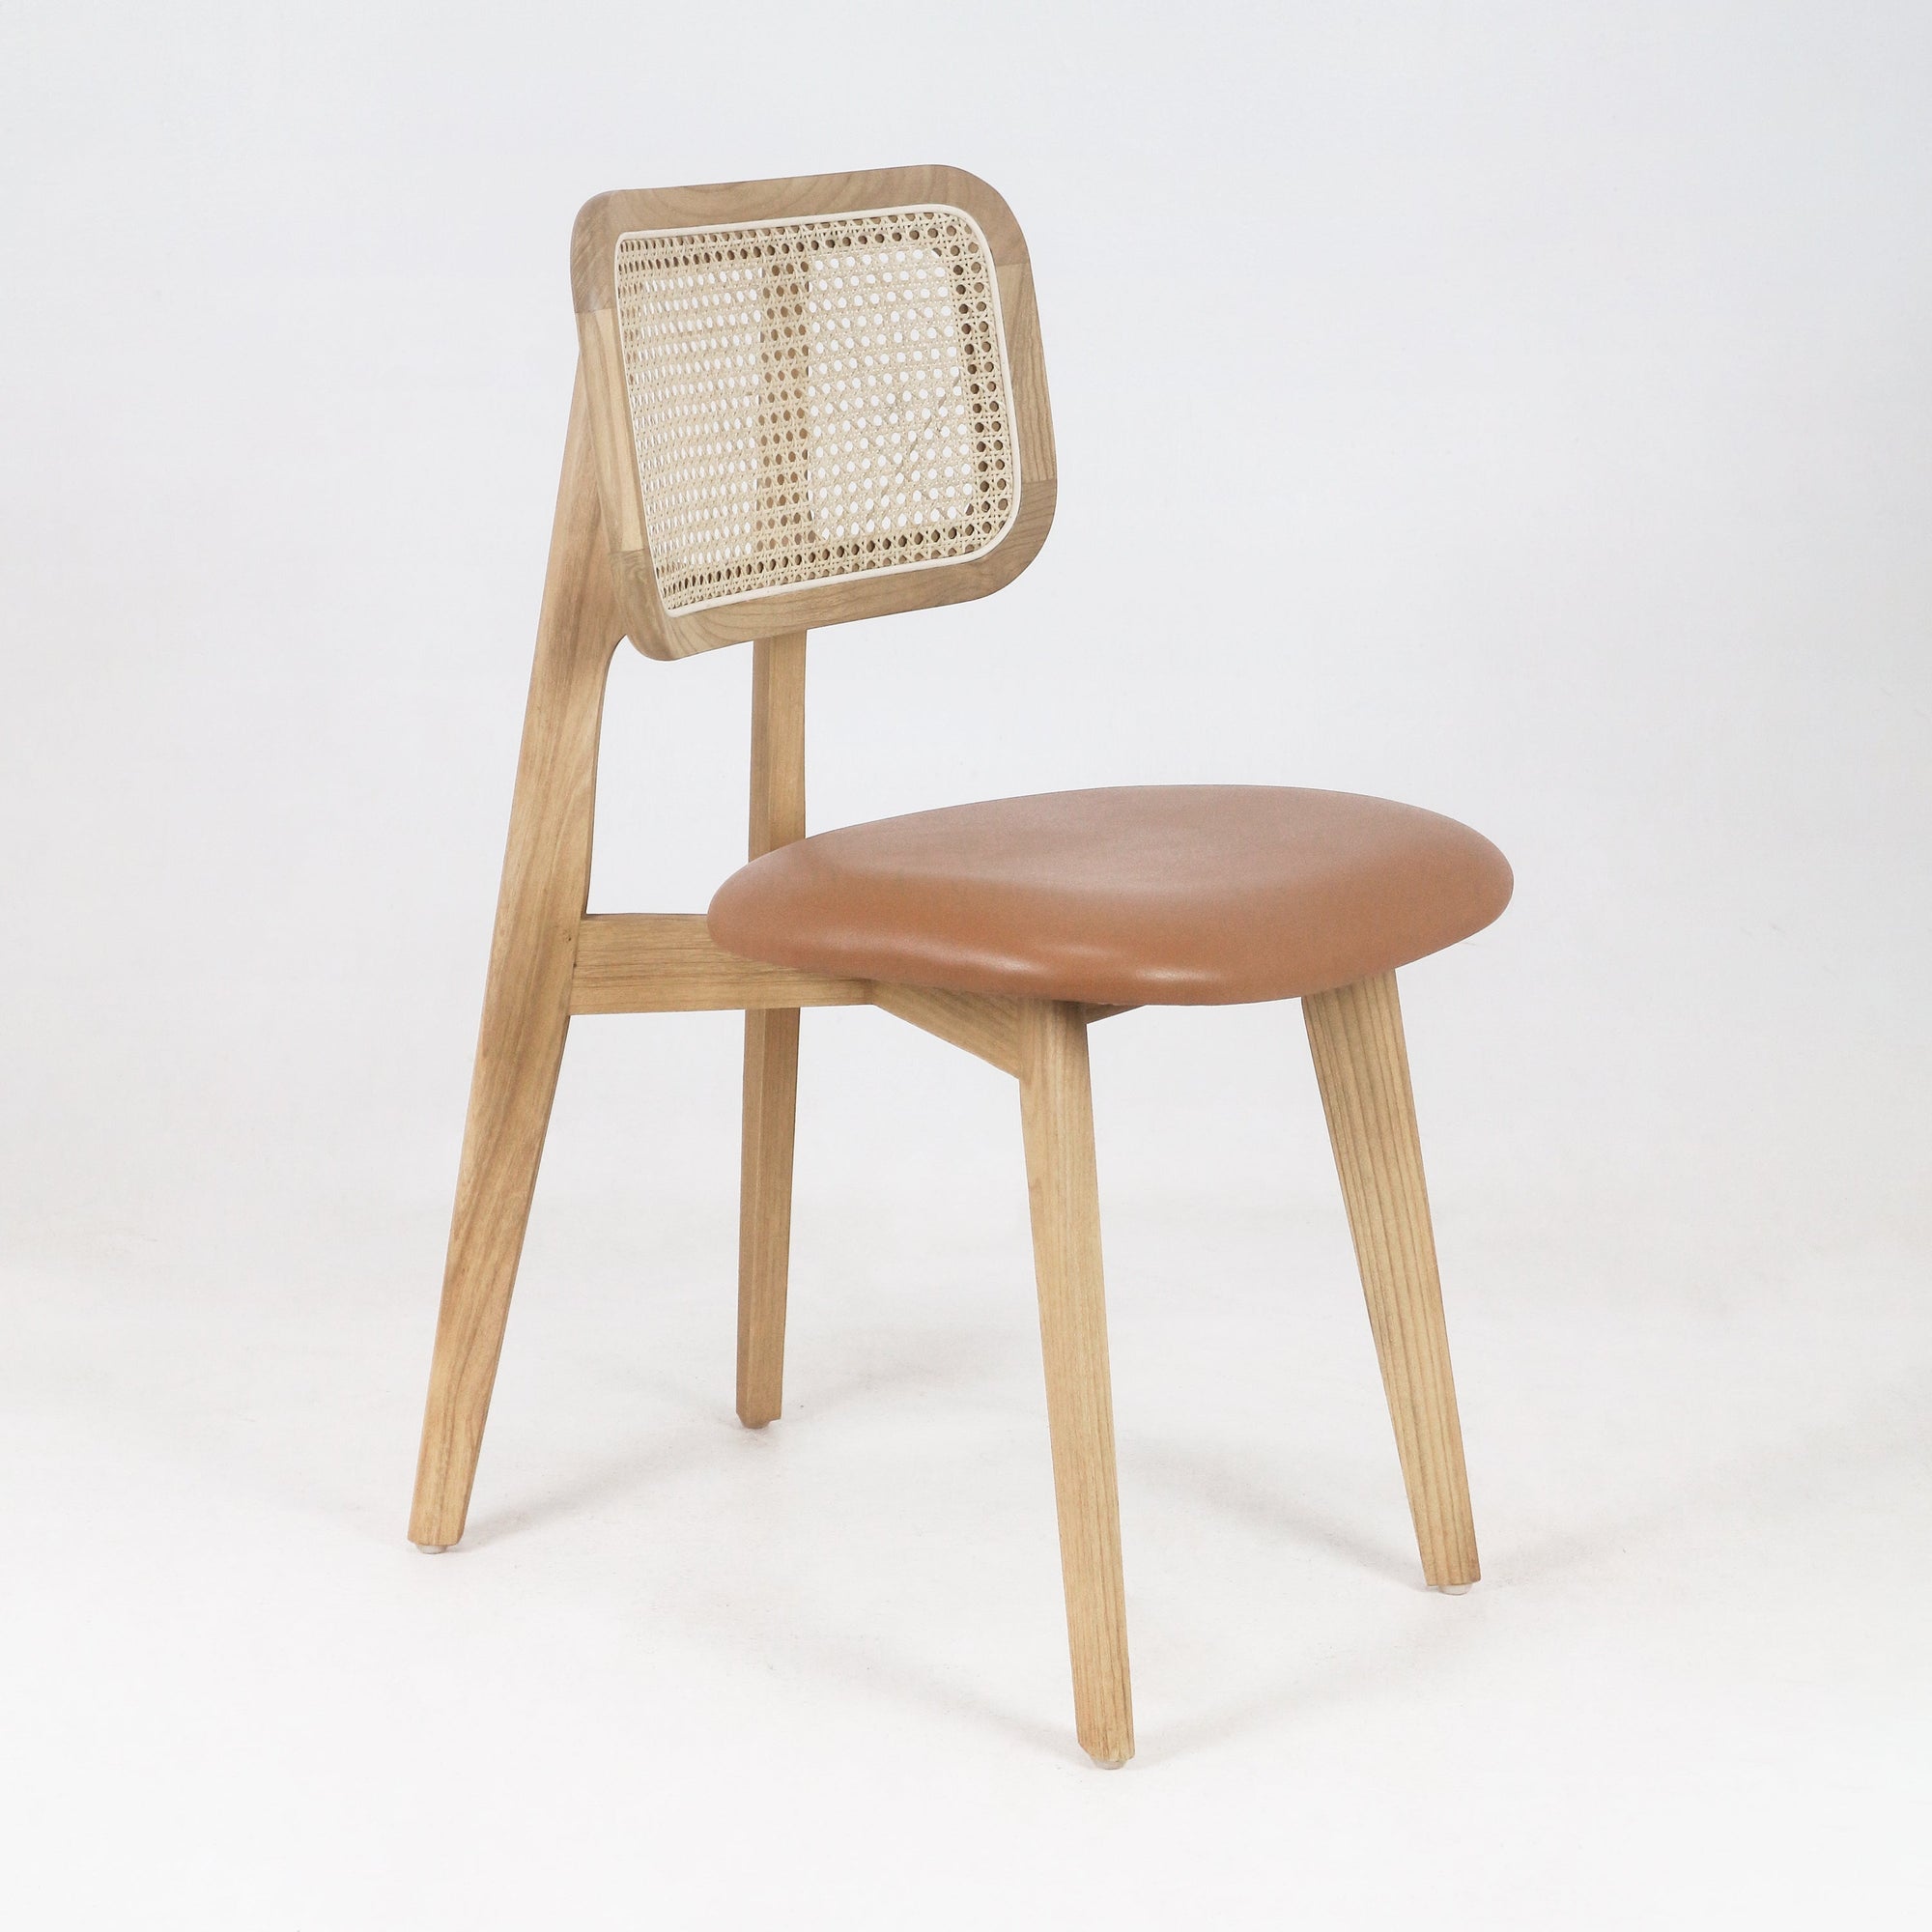 Abode Dining Chair with Rattan Backrest with Tan Leather Seat - INTERIORTONIC